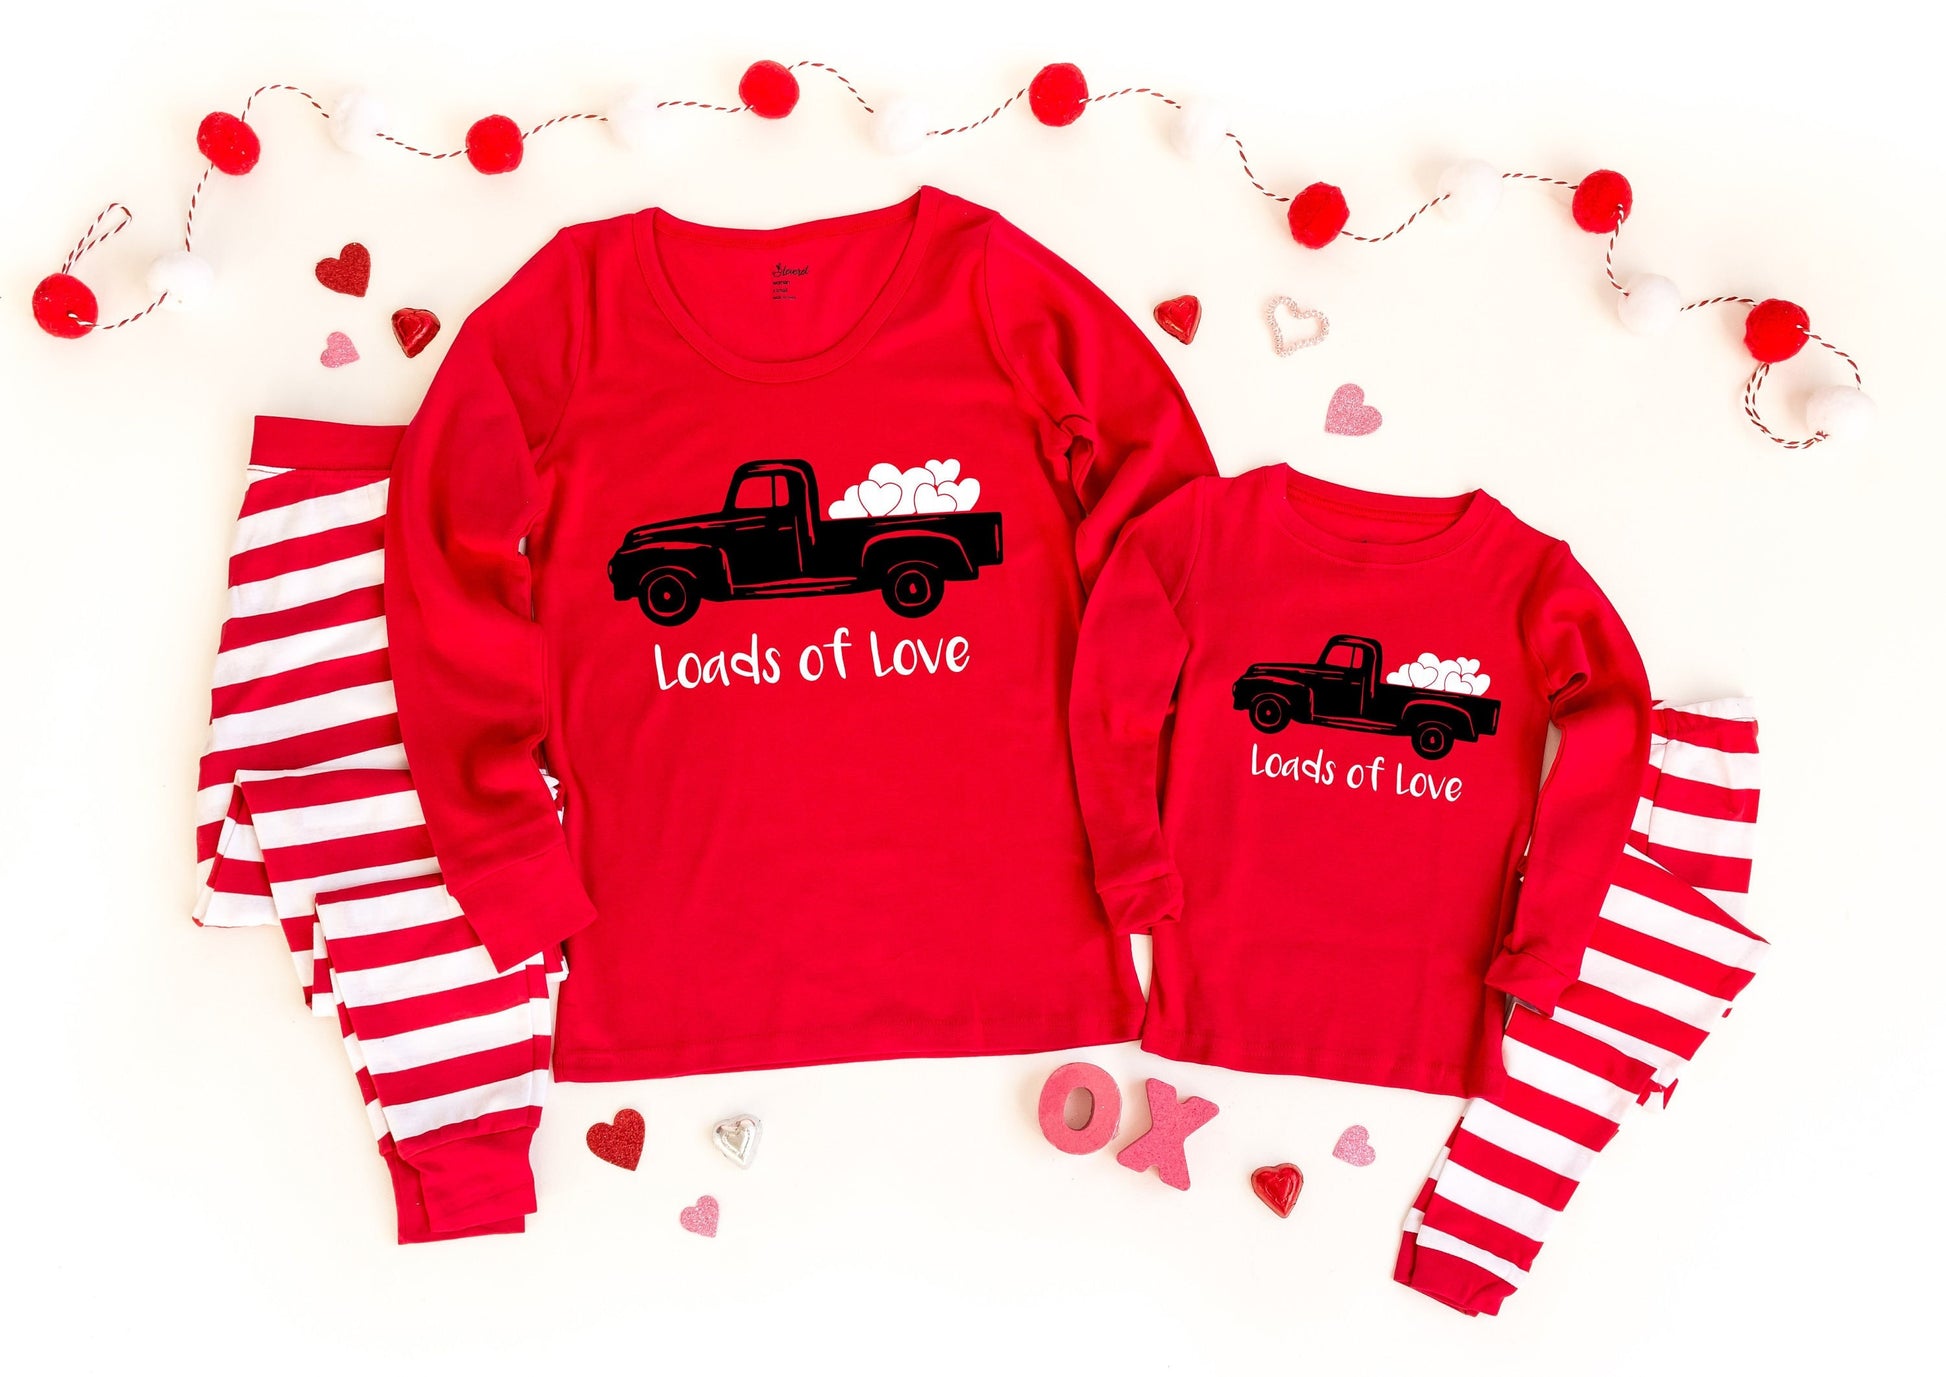 Loads of Love Red Striped Pajamas, mommy and me pjs, valentines pajamas for the family, dog pajamas, family pajamas, valentines day